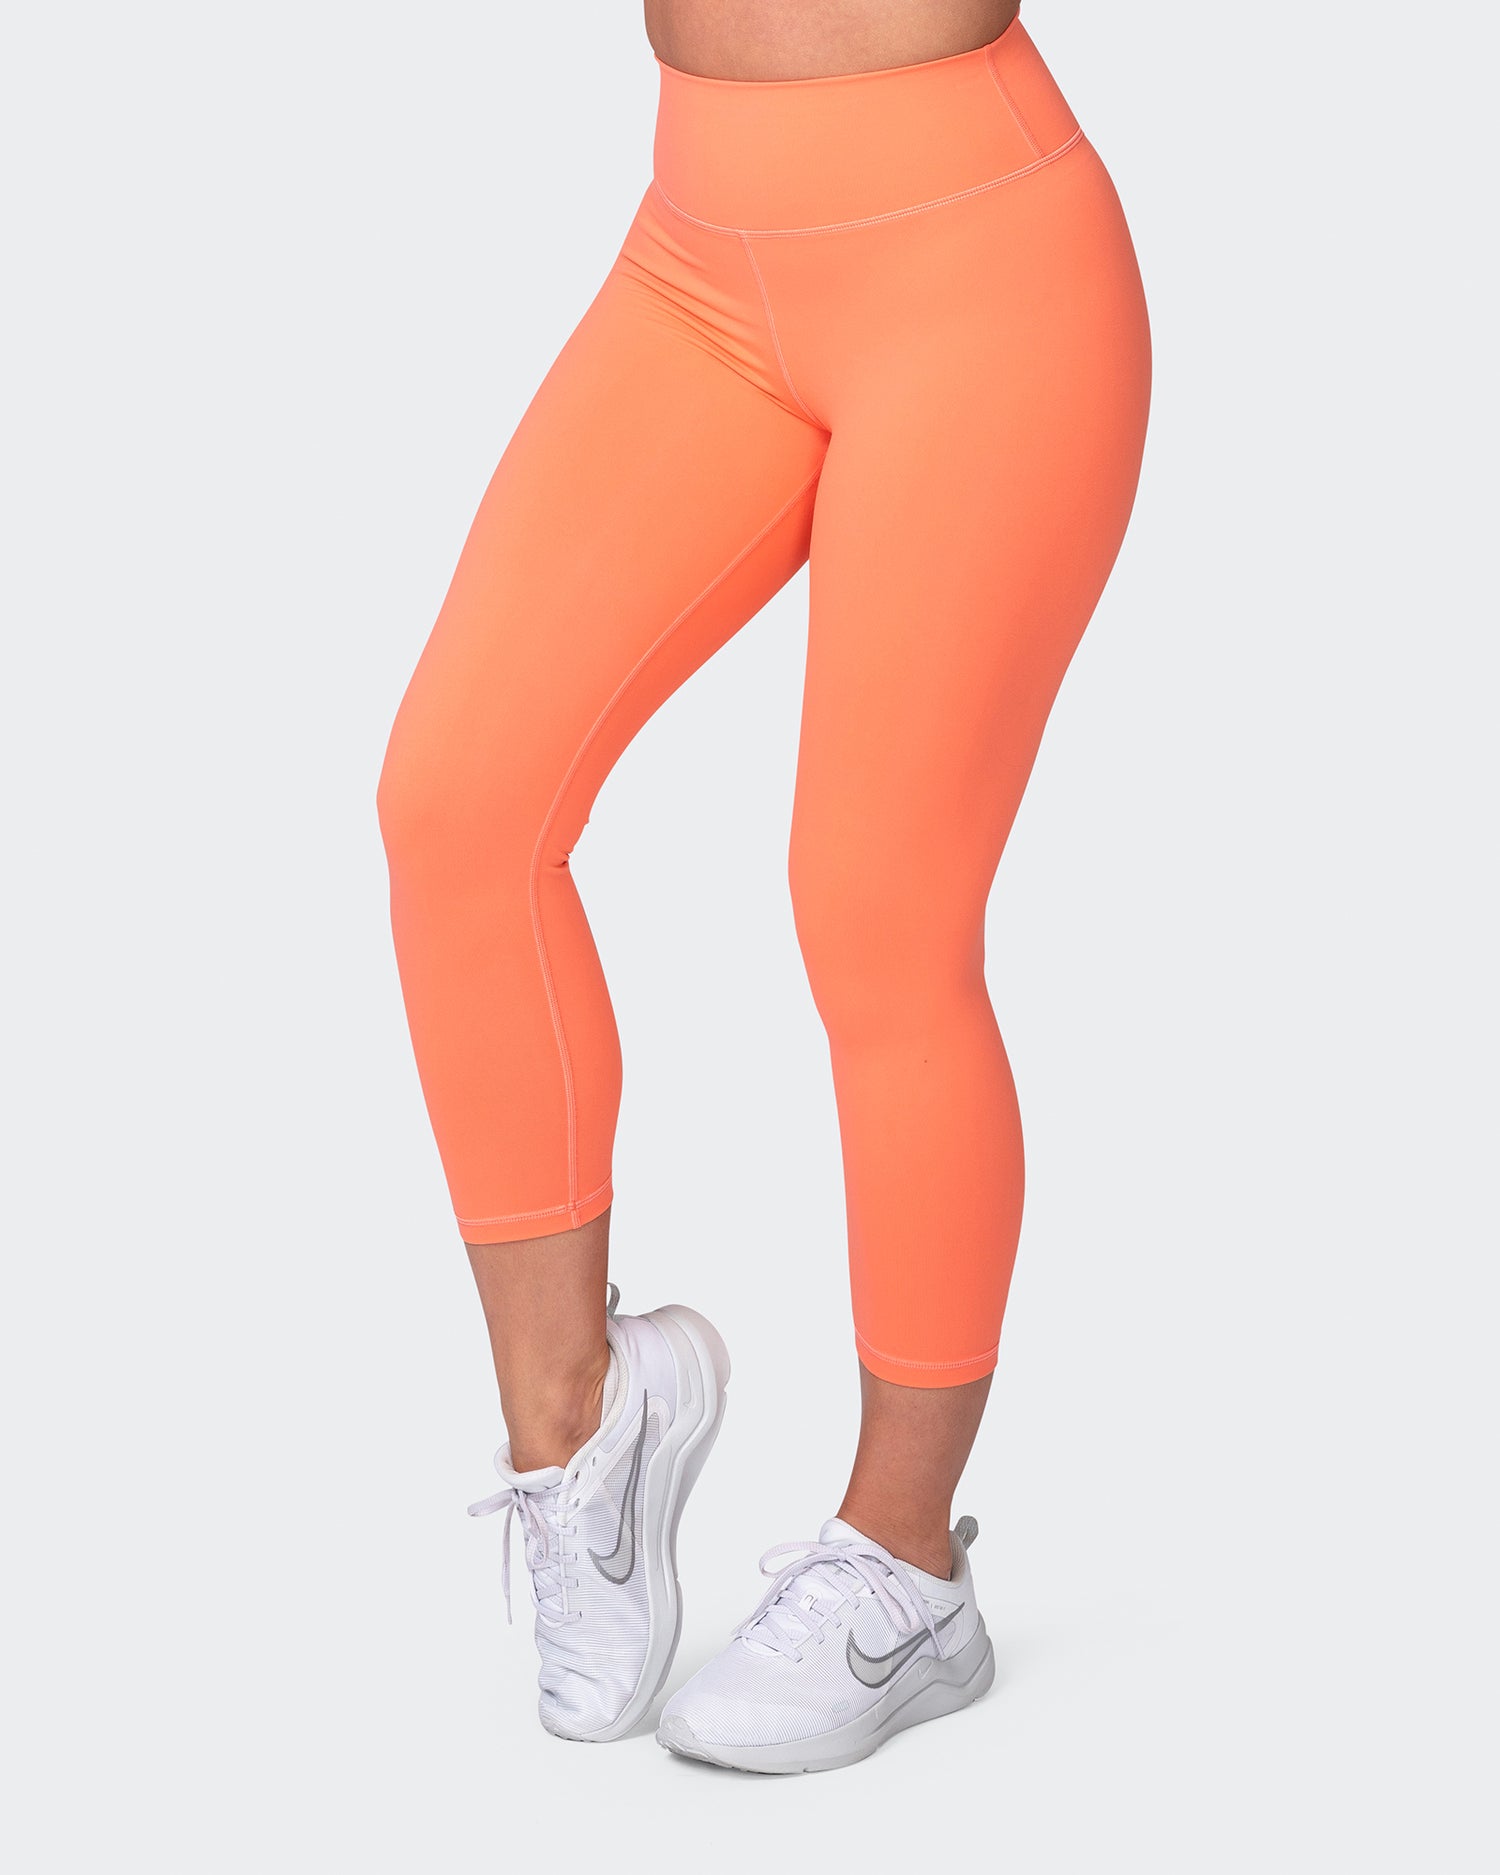 Signature Scrunch 7/8 Leggings - Hot Coral - Muscle Nation